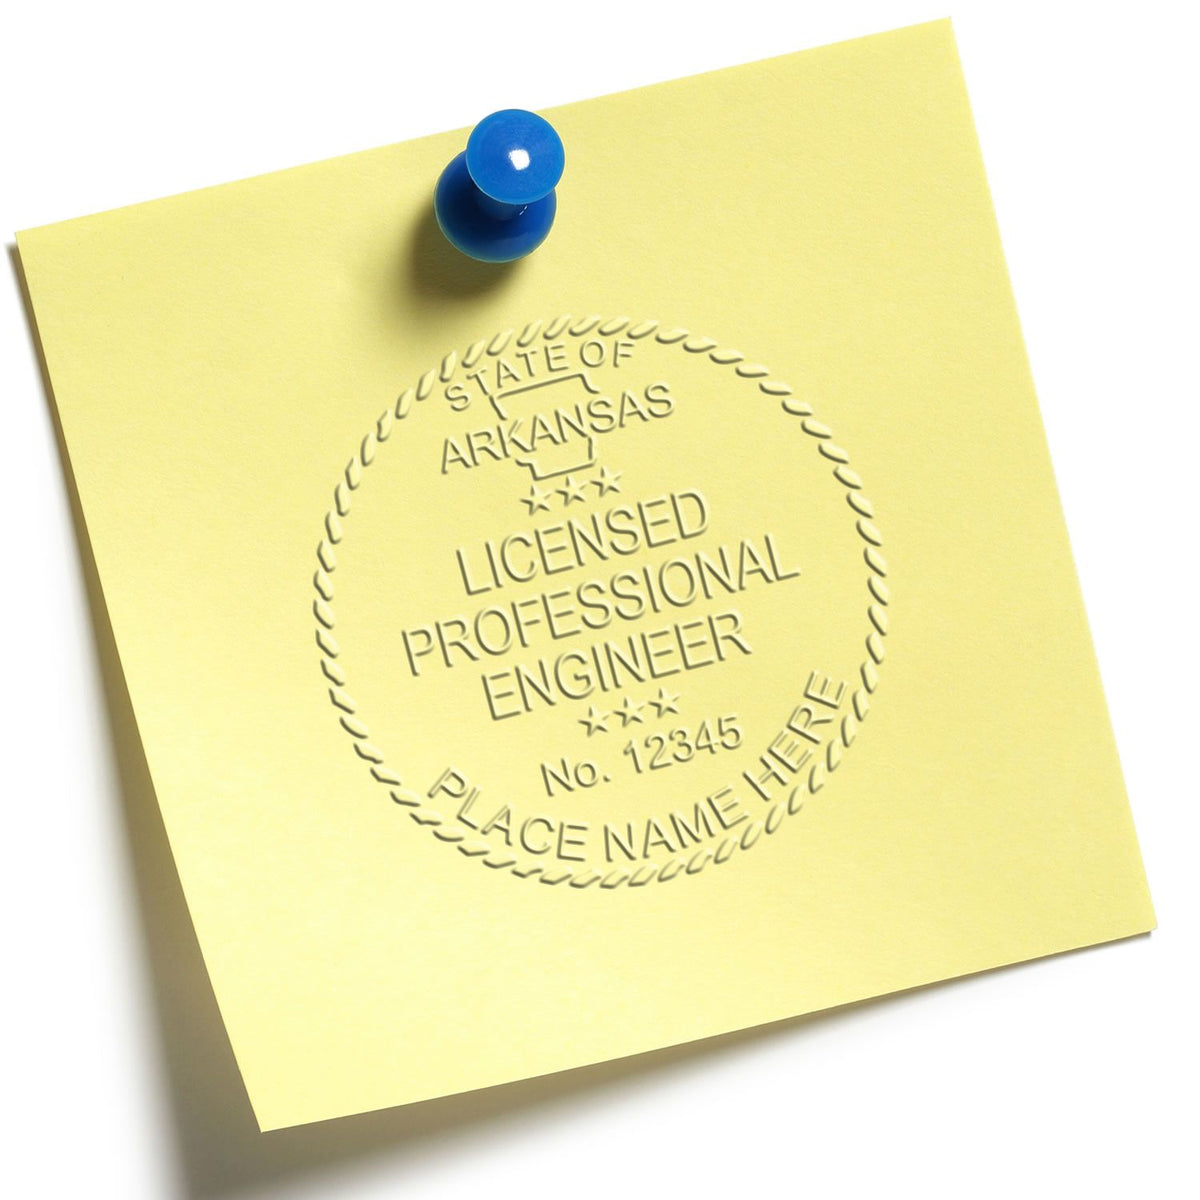 An in use photo of the Gift Arkansas Engineer Seal showing a sample imprint on a cardstock